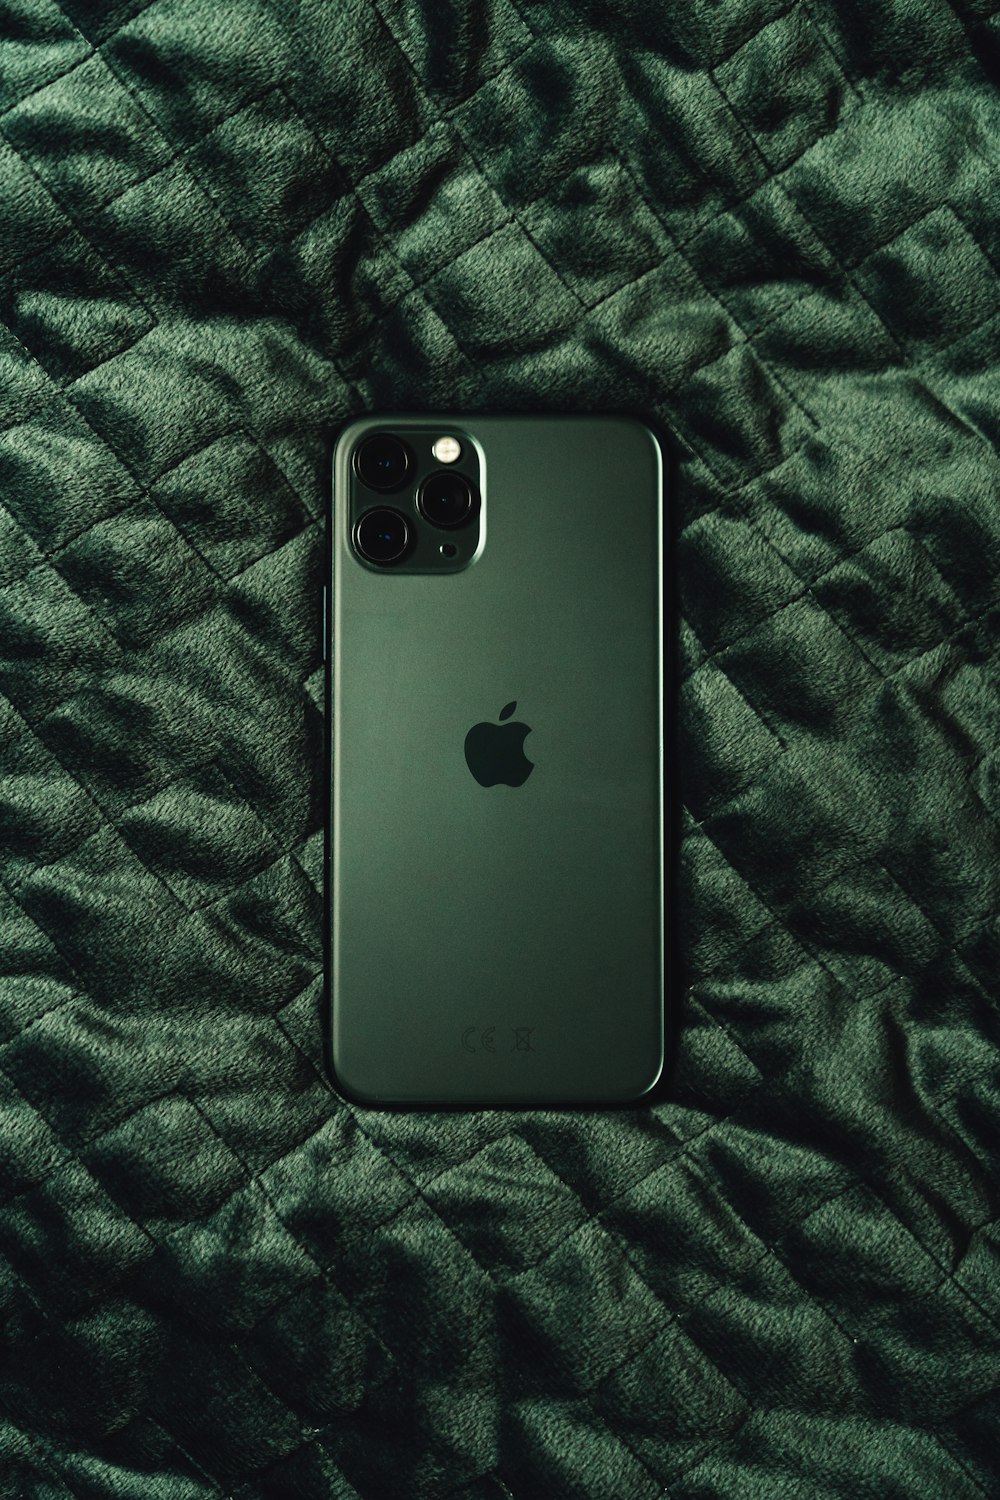 Apple Iphone 11 Pro Pictures Download Free Images On Unsplash